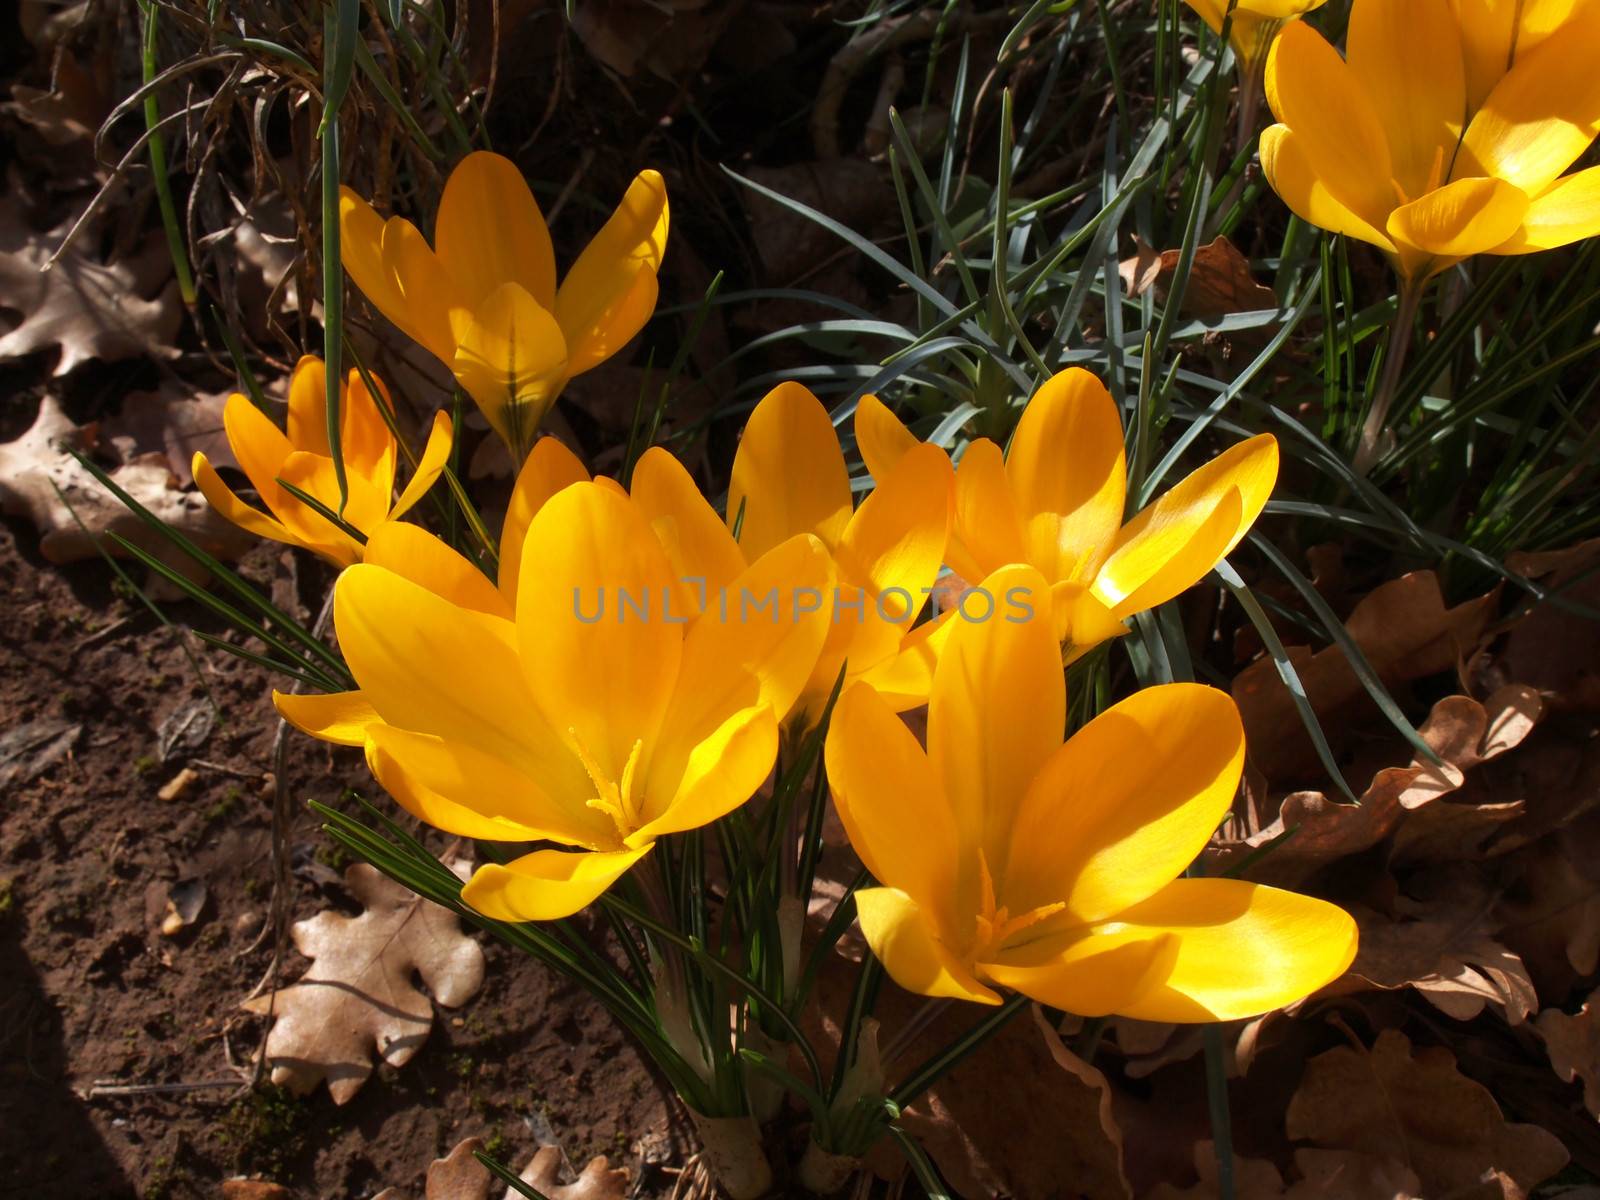 yellow crocus by nevenm